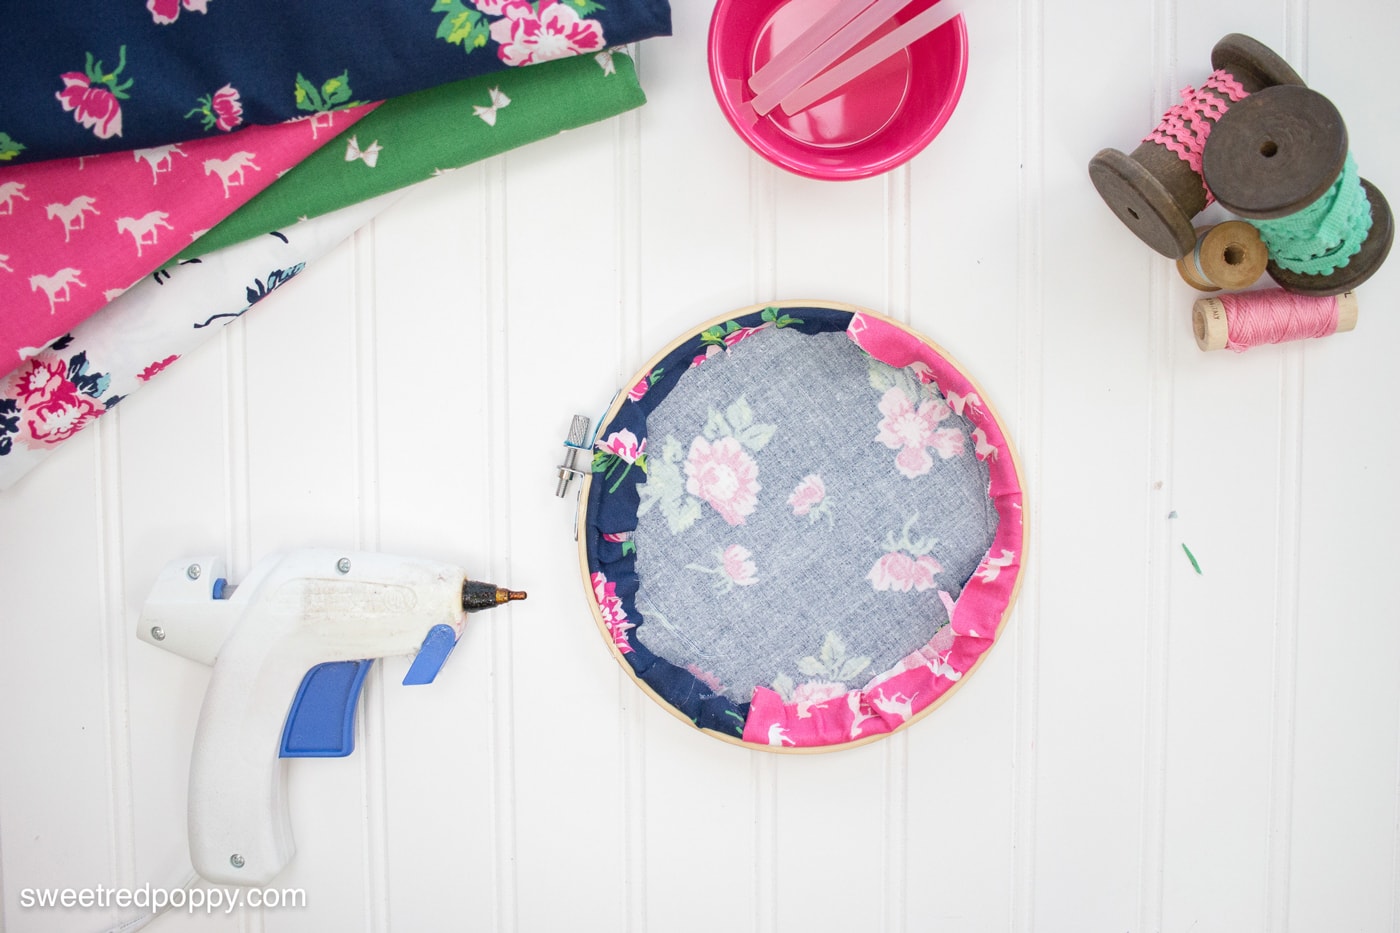 How to make an embroidery hoop hanging wall organizer